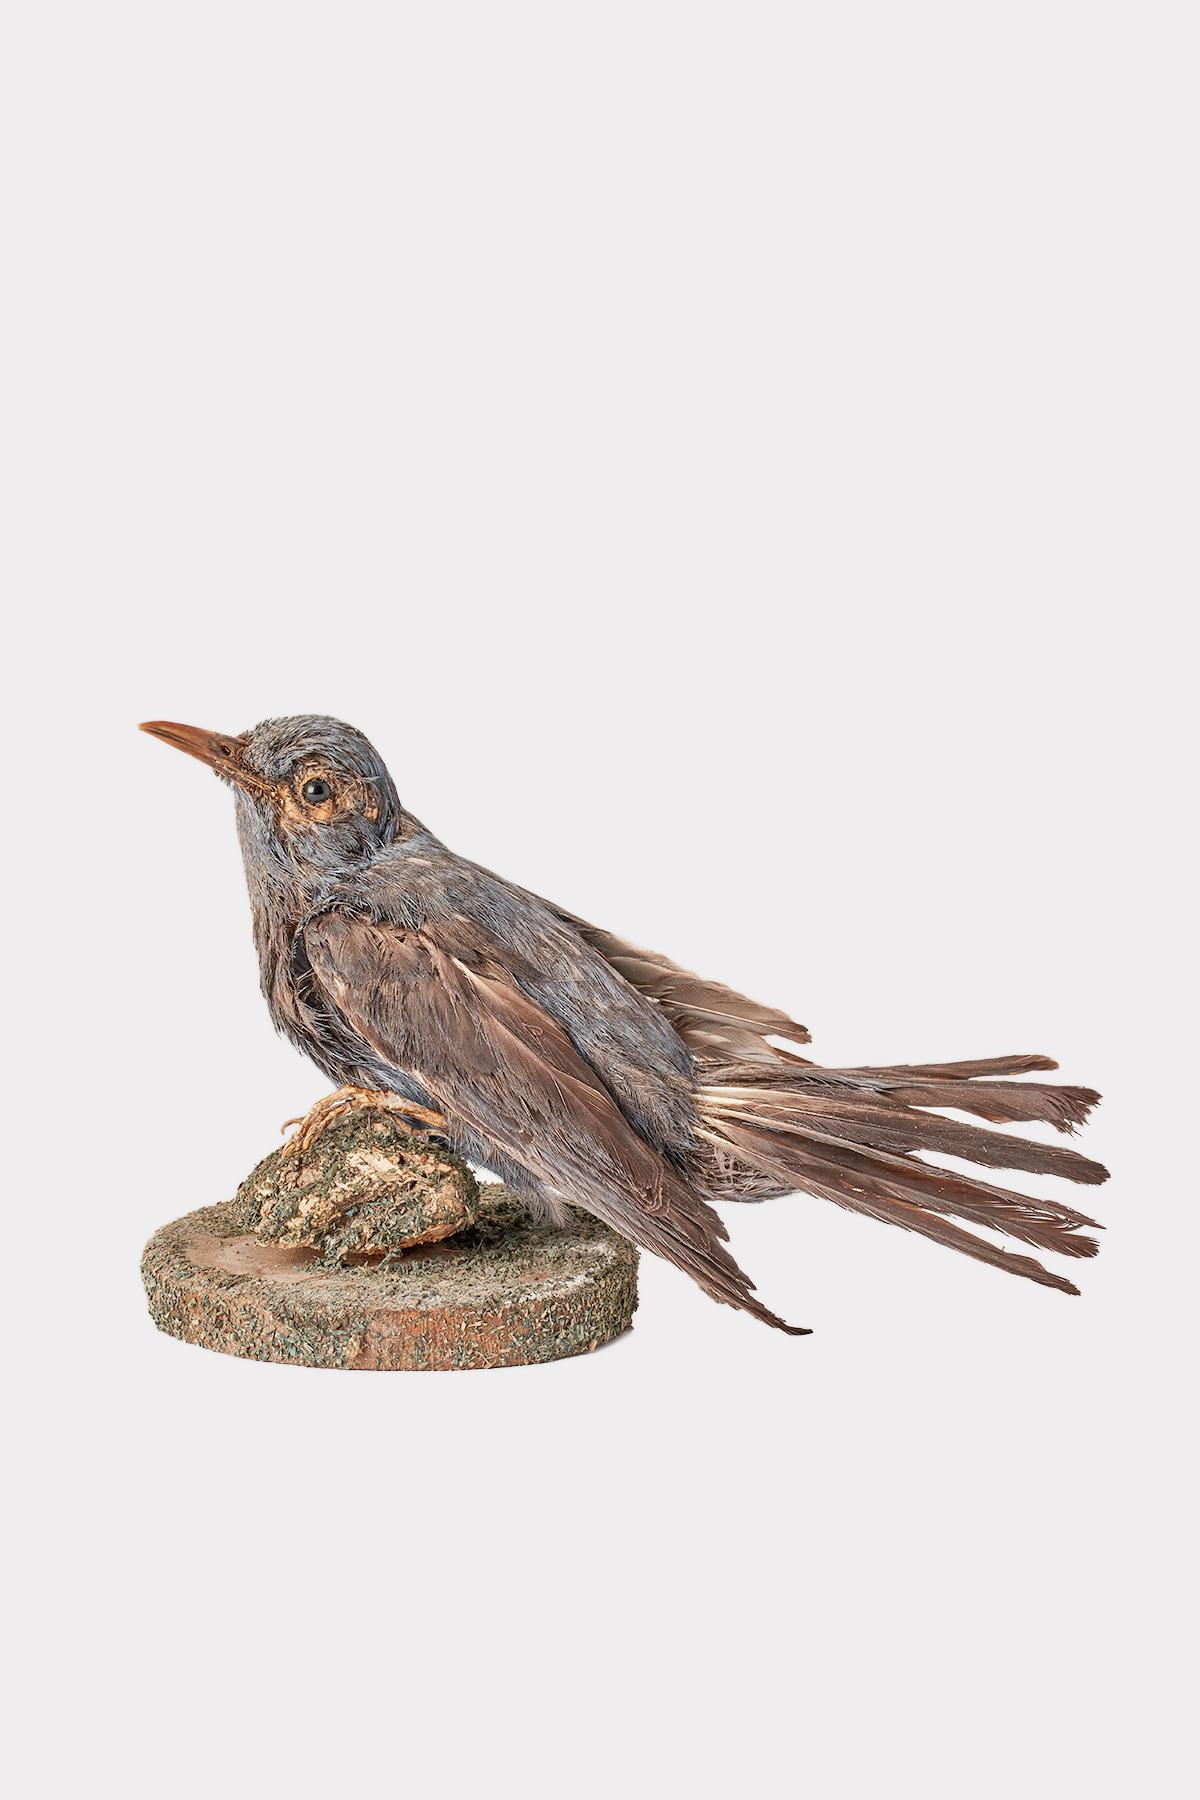 Natural specimen from Wunderkammer Stuffed bird Eastern Blue bird (Sialia sialis) mounted on a wooden base with cartouche Specimen for laboratory and Natural history cabinet. S. Brogi Naturalista. Siena, Italy 1880 ca.